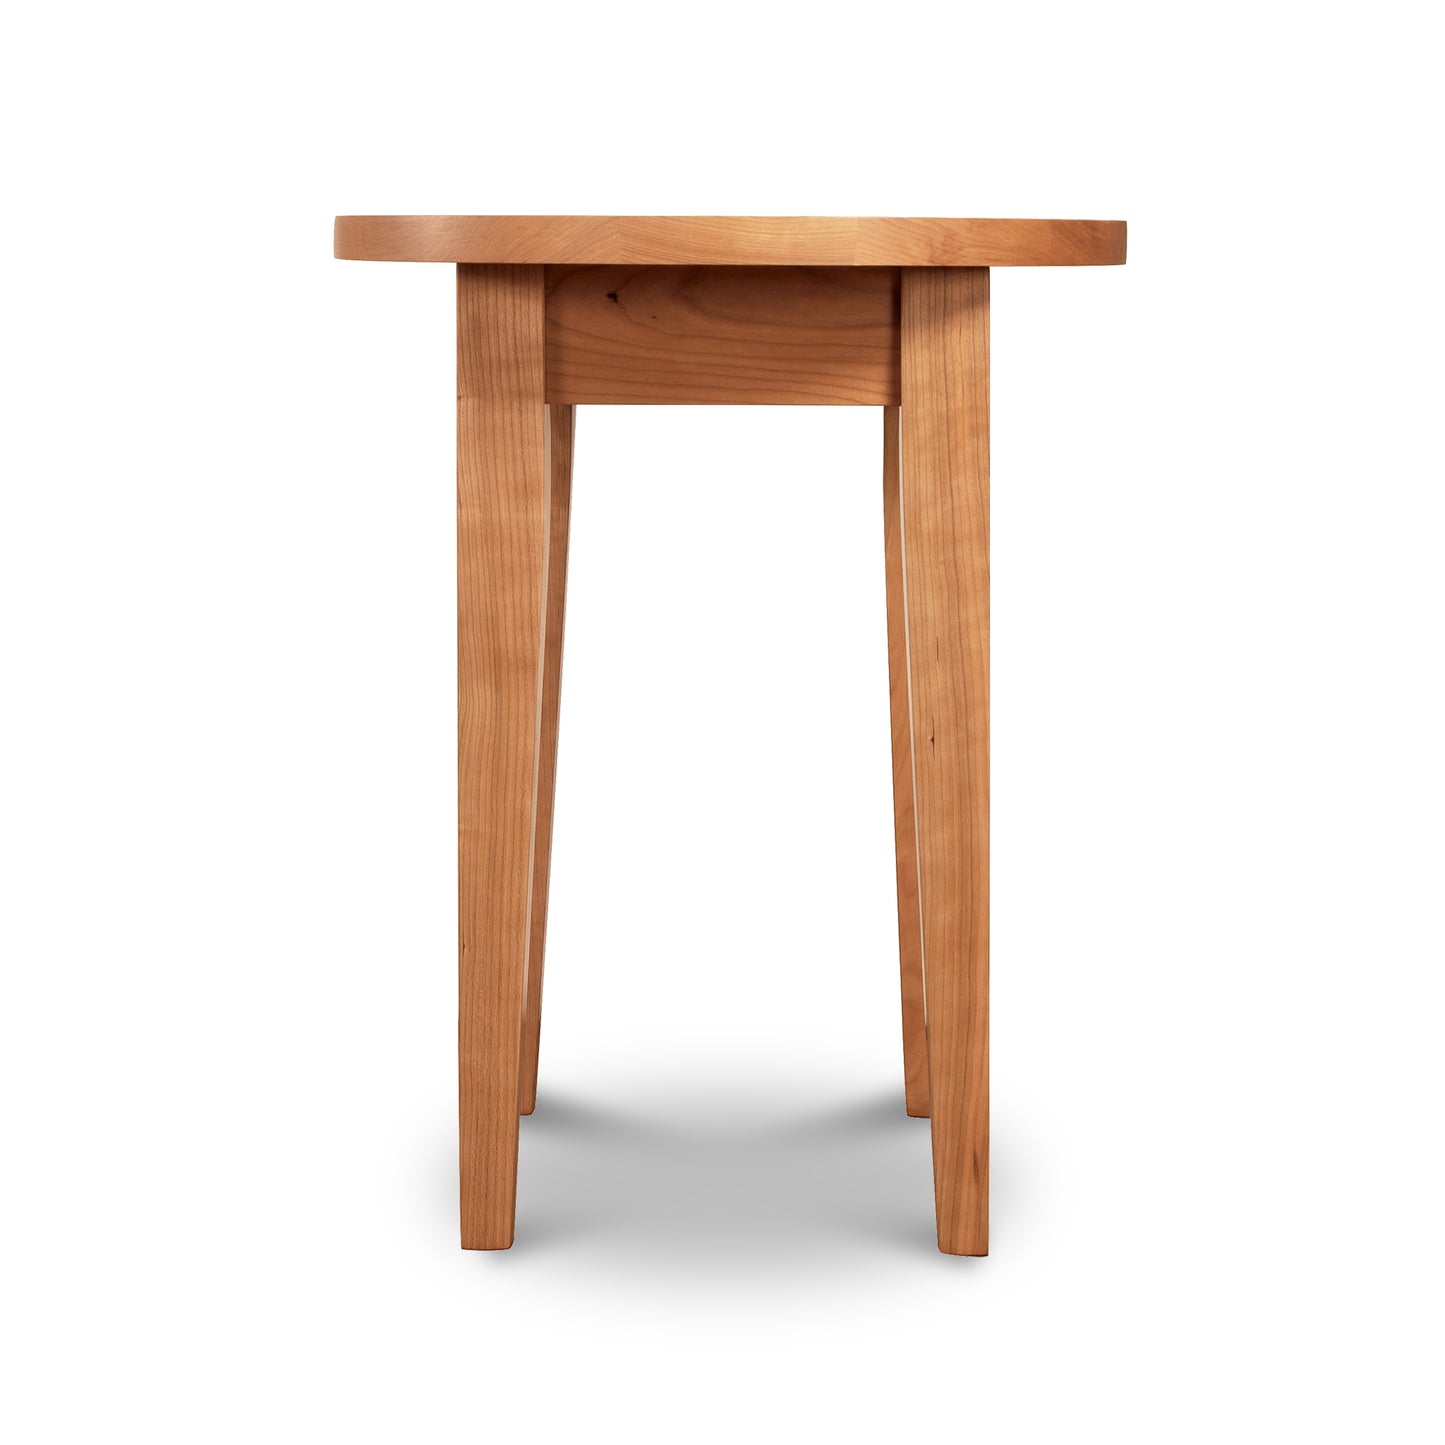 A Classic Shaker Round End Table from Lyndon Furniture with a simple design, crafted from sustainable wood, featuring four legs and a flat top, isolated on a white background.